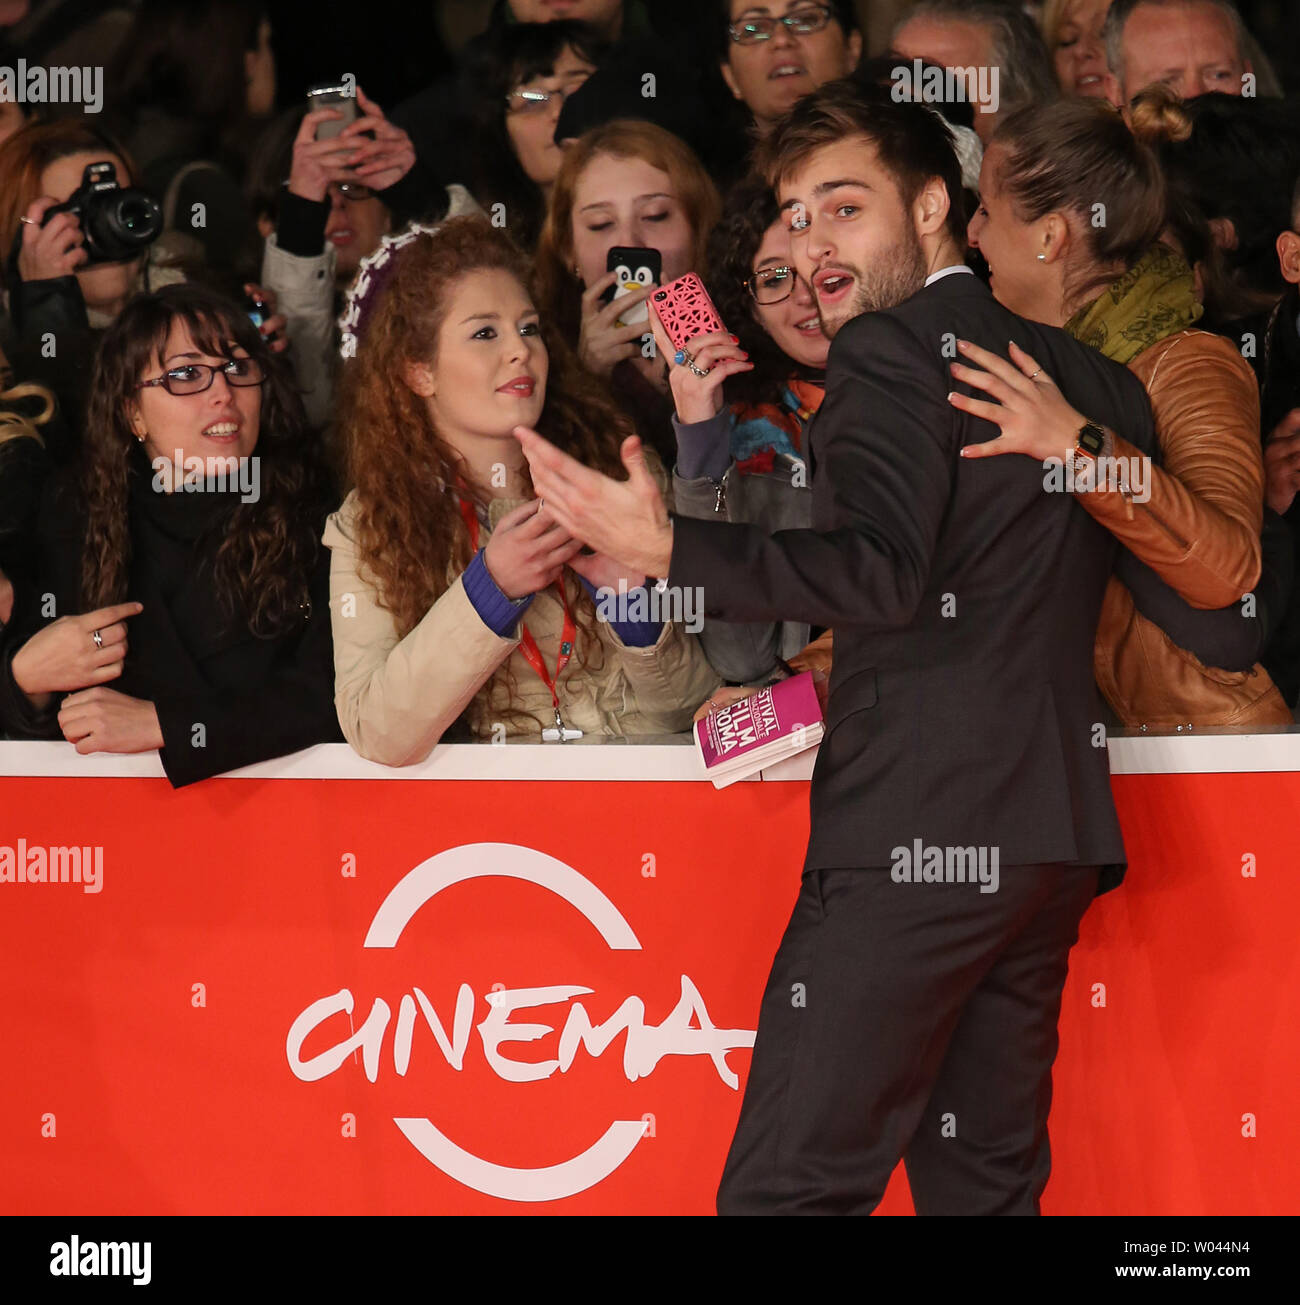 Douglas Booth arrives on the red carpet before the screening of the film 'Romeo and Juliet' during the 8th annual Rome International Film Festival in Rome on November 11, 2013.   UPI/David Silpa Stock Photo